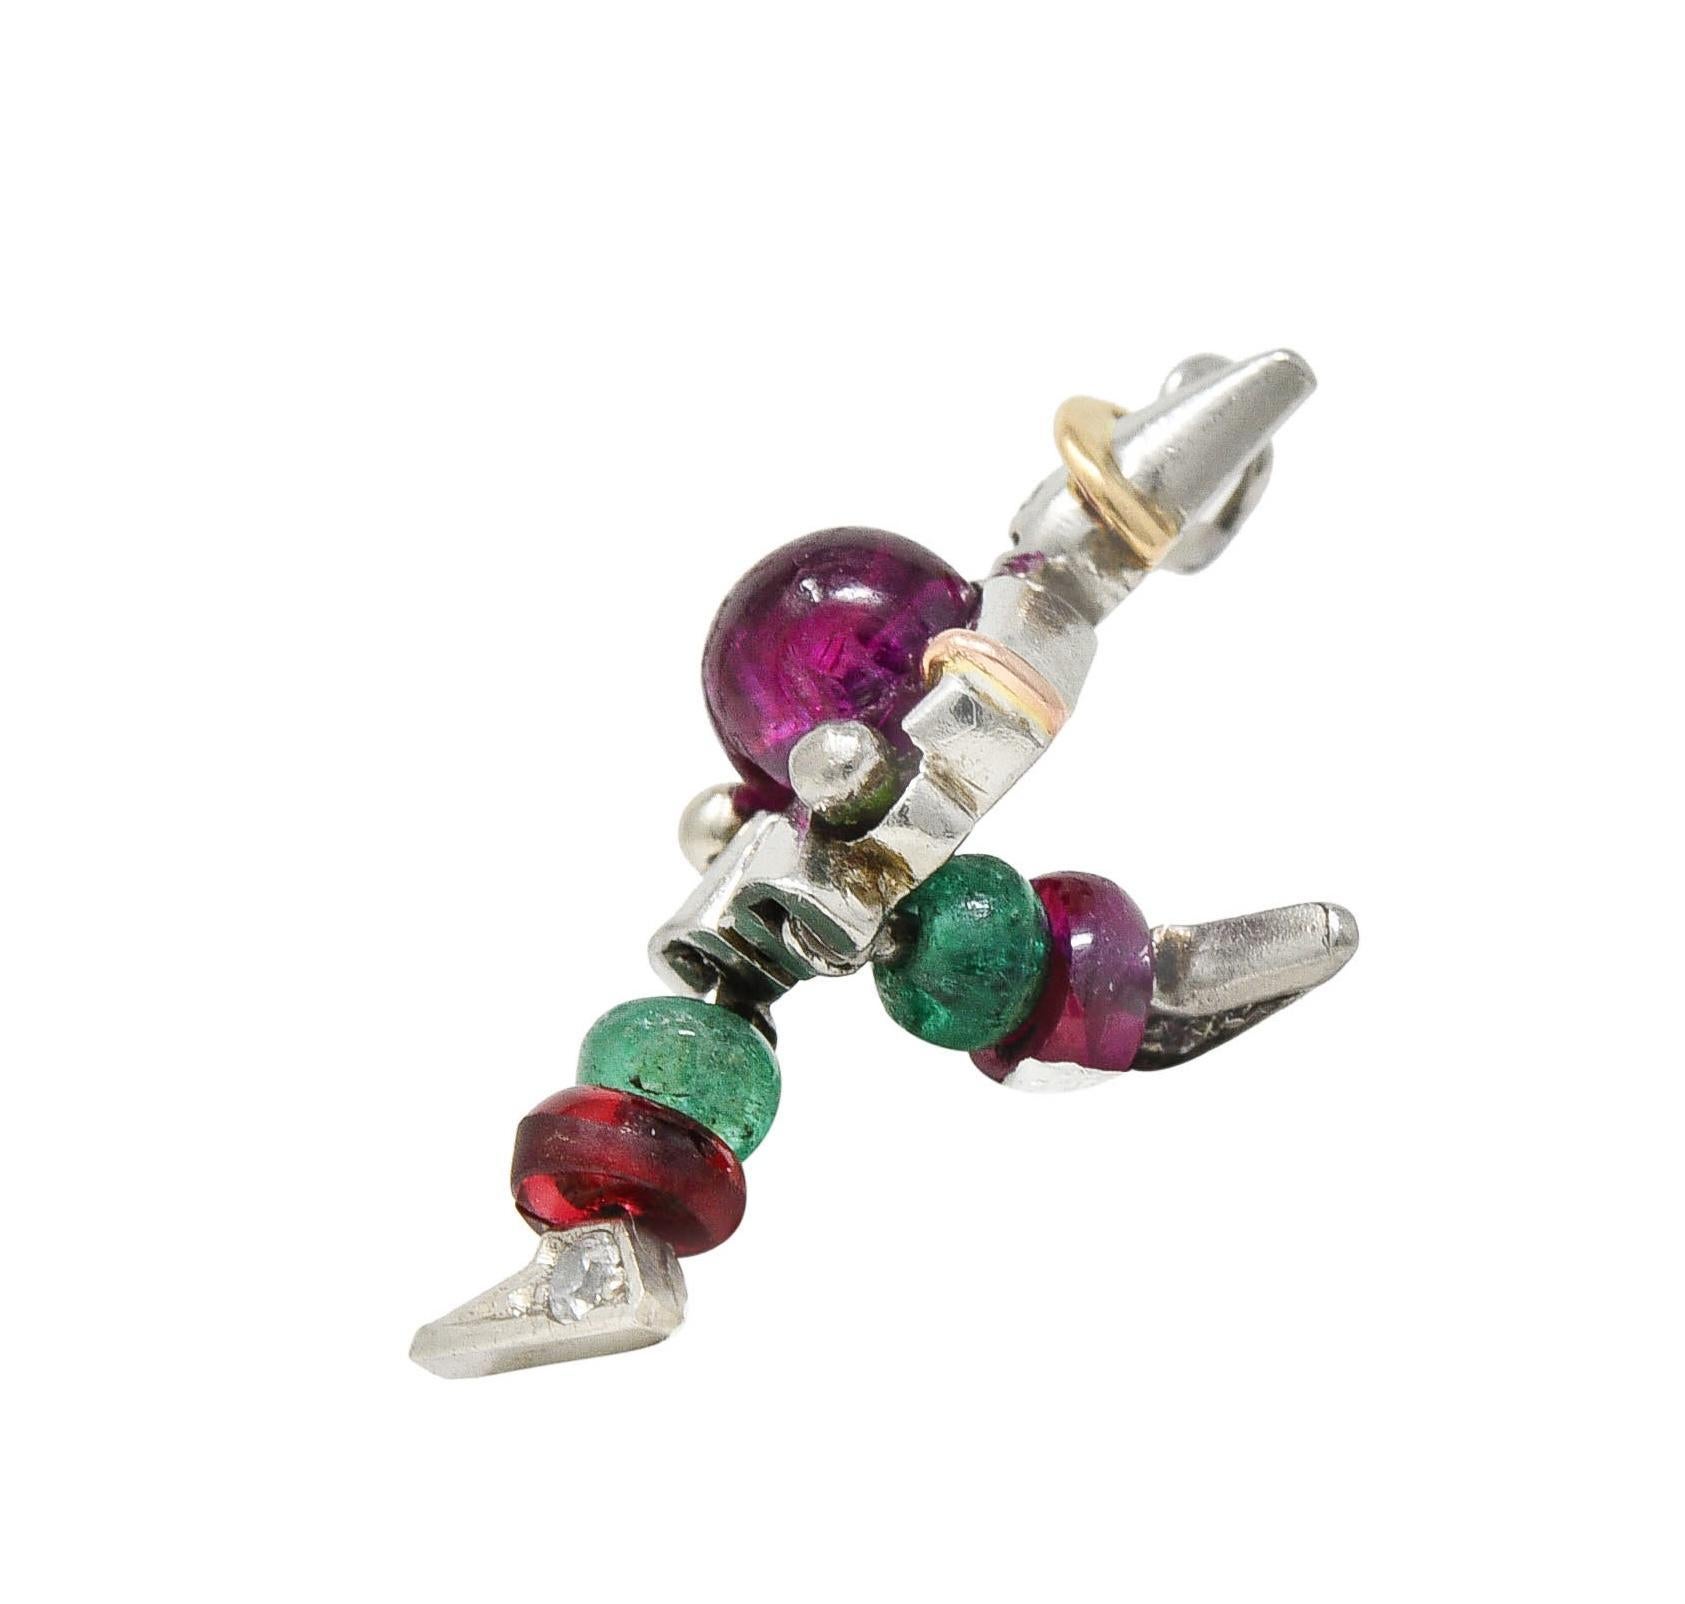 Designed as a stylized platinum clown with yellow gold details and articulating legs
Centering a round shaped ruby cabochon weighing approximately 0.72 carat
Transparent medium purplish red in color - bezel set as torso 
With ruby and emerald